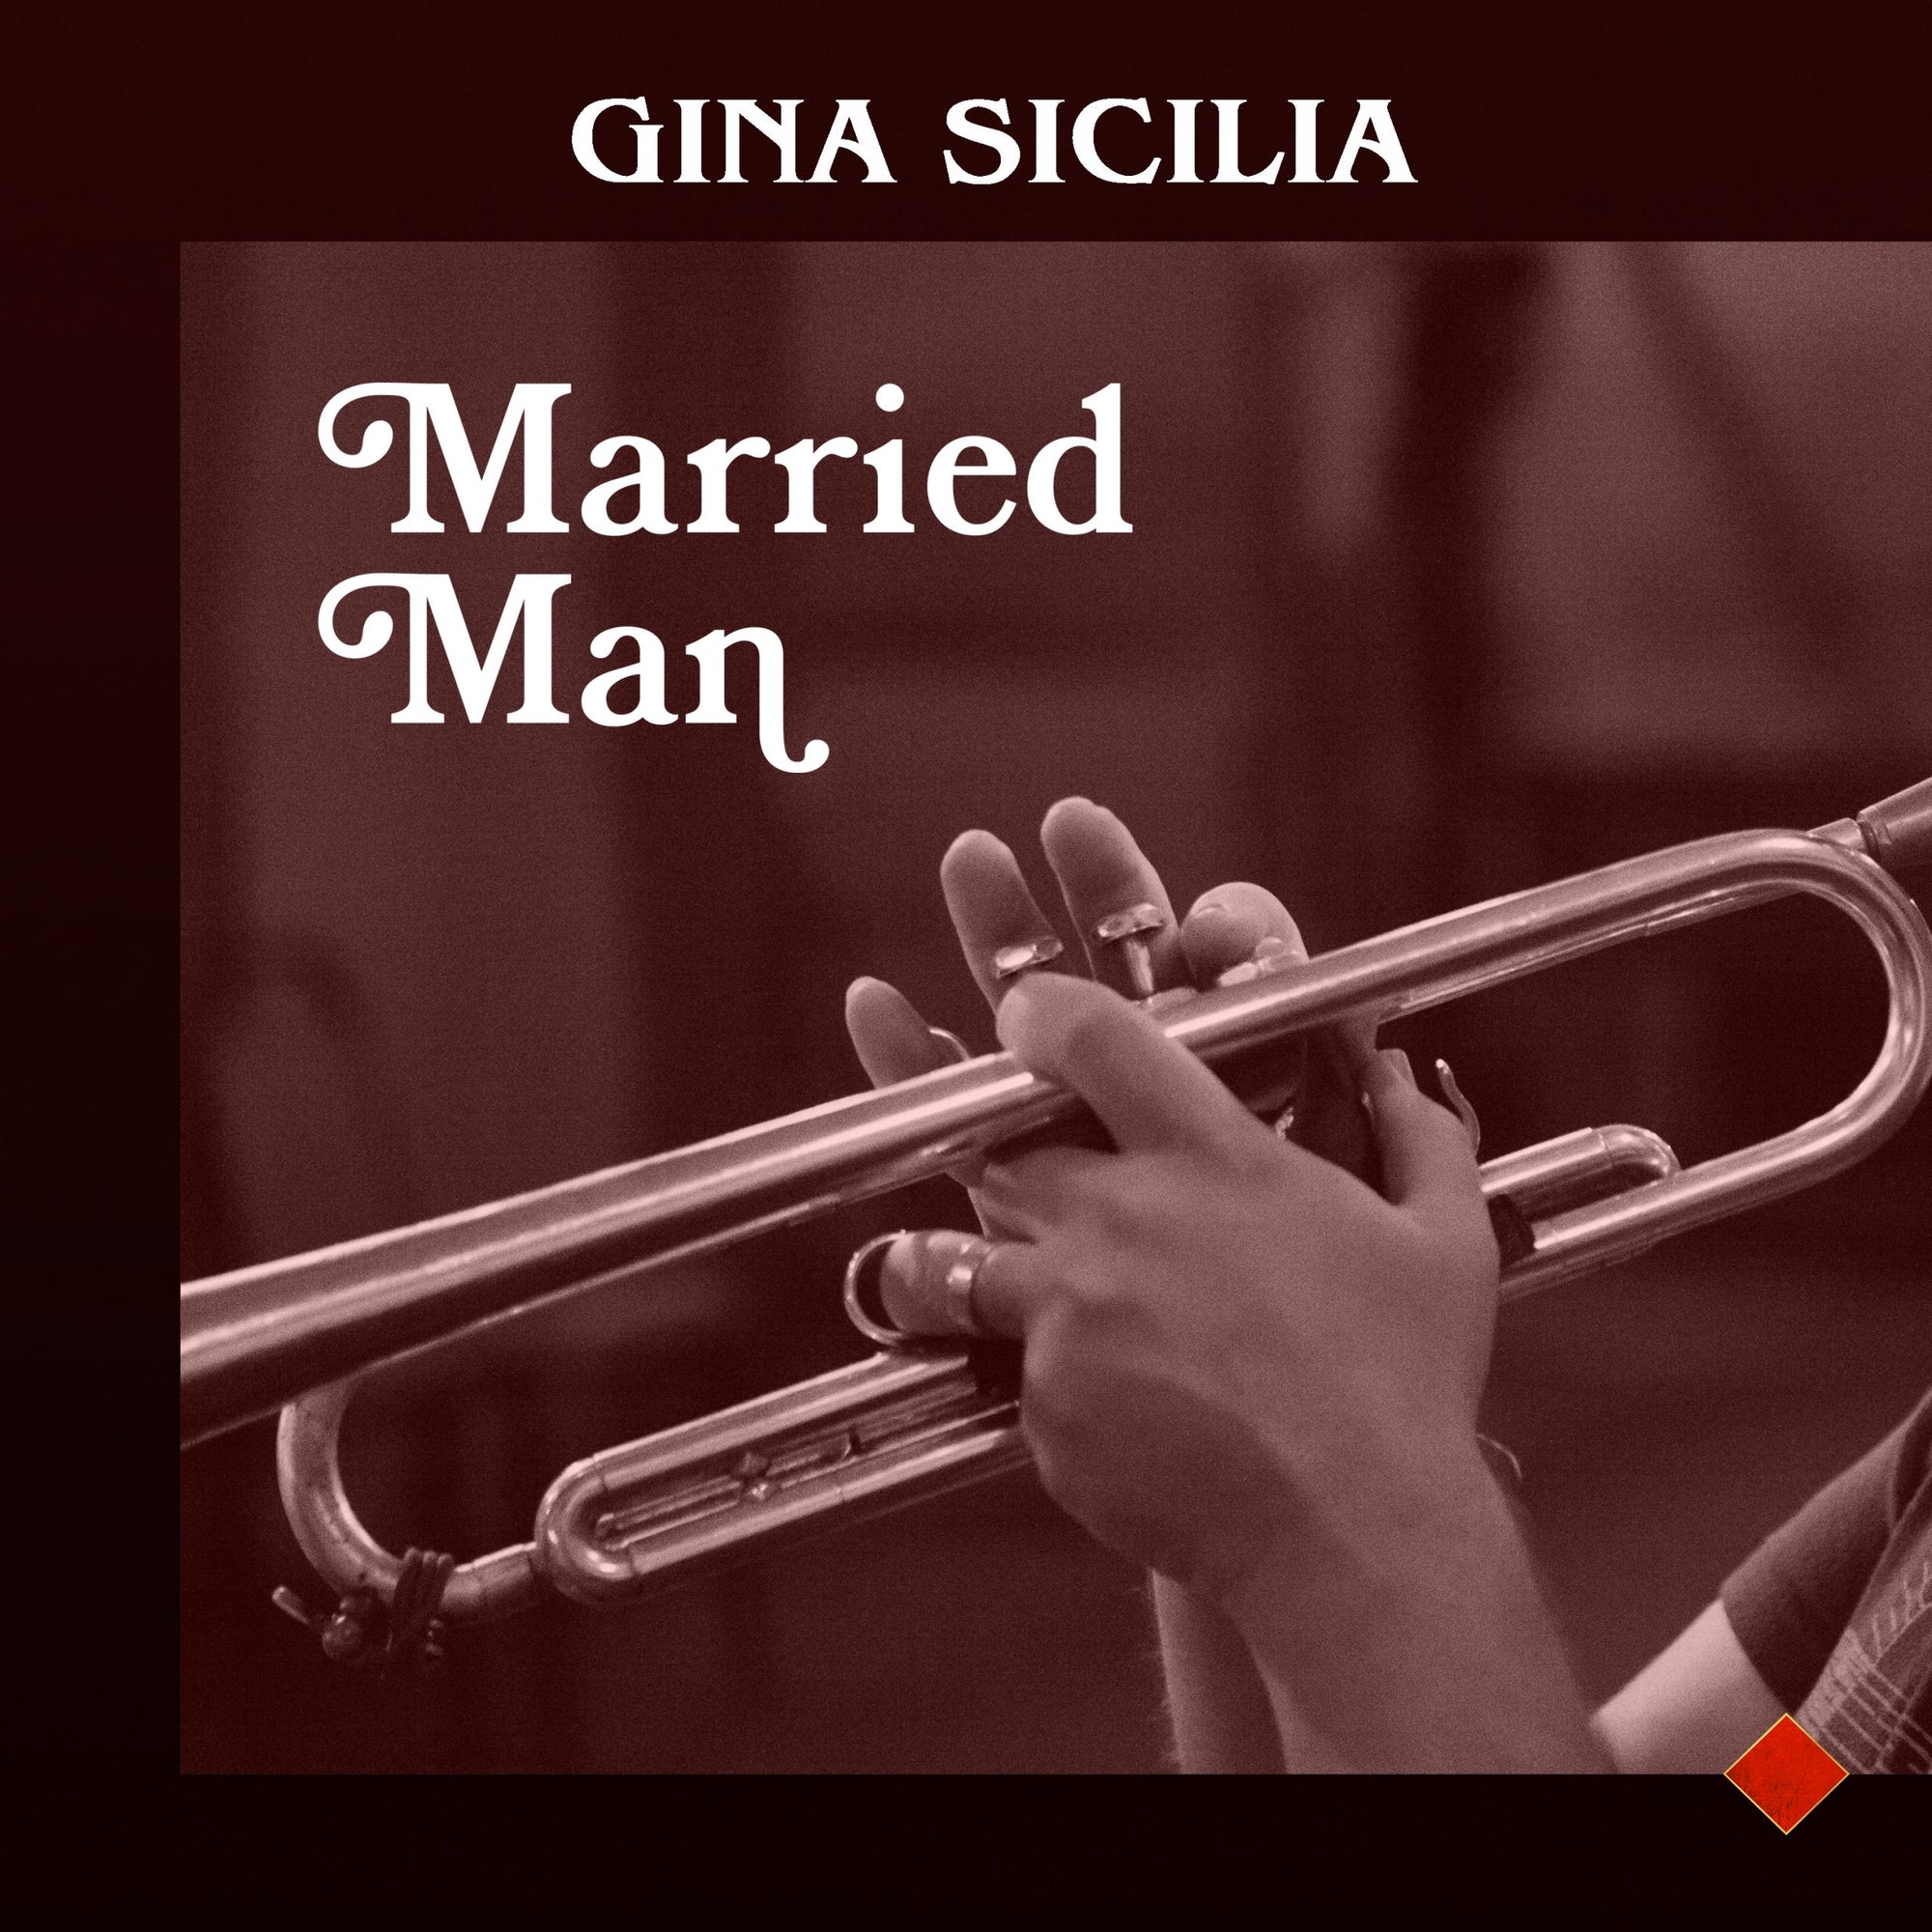 Gina Sicilia releases Love Me Madly followup single, "Married Man"